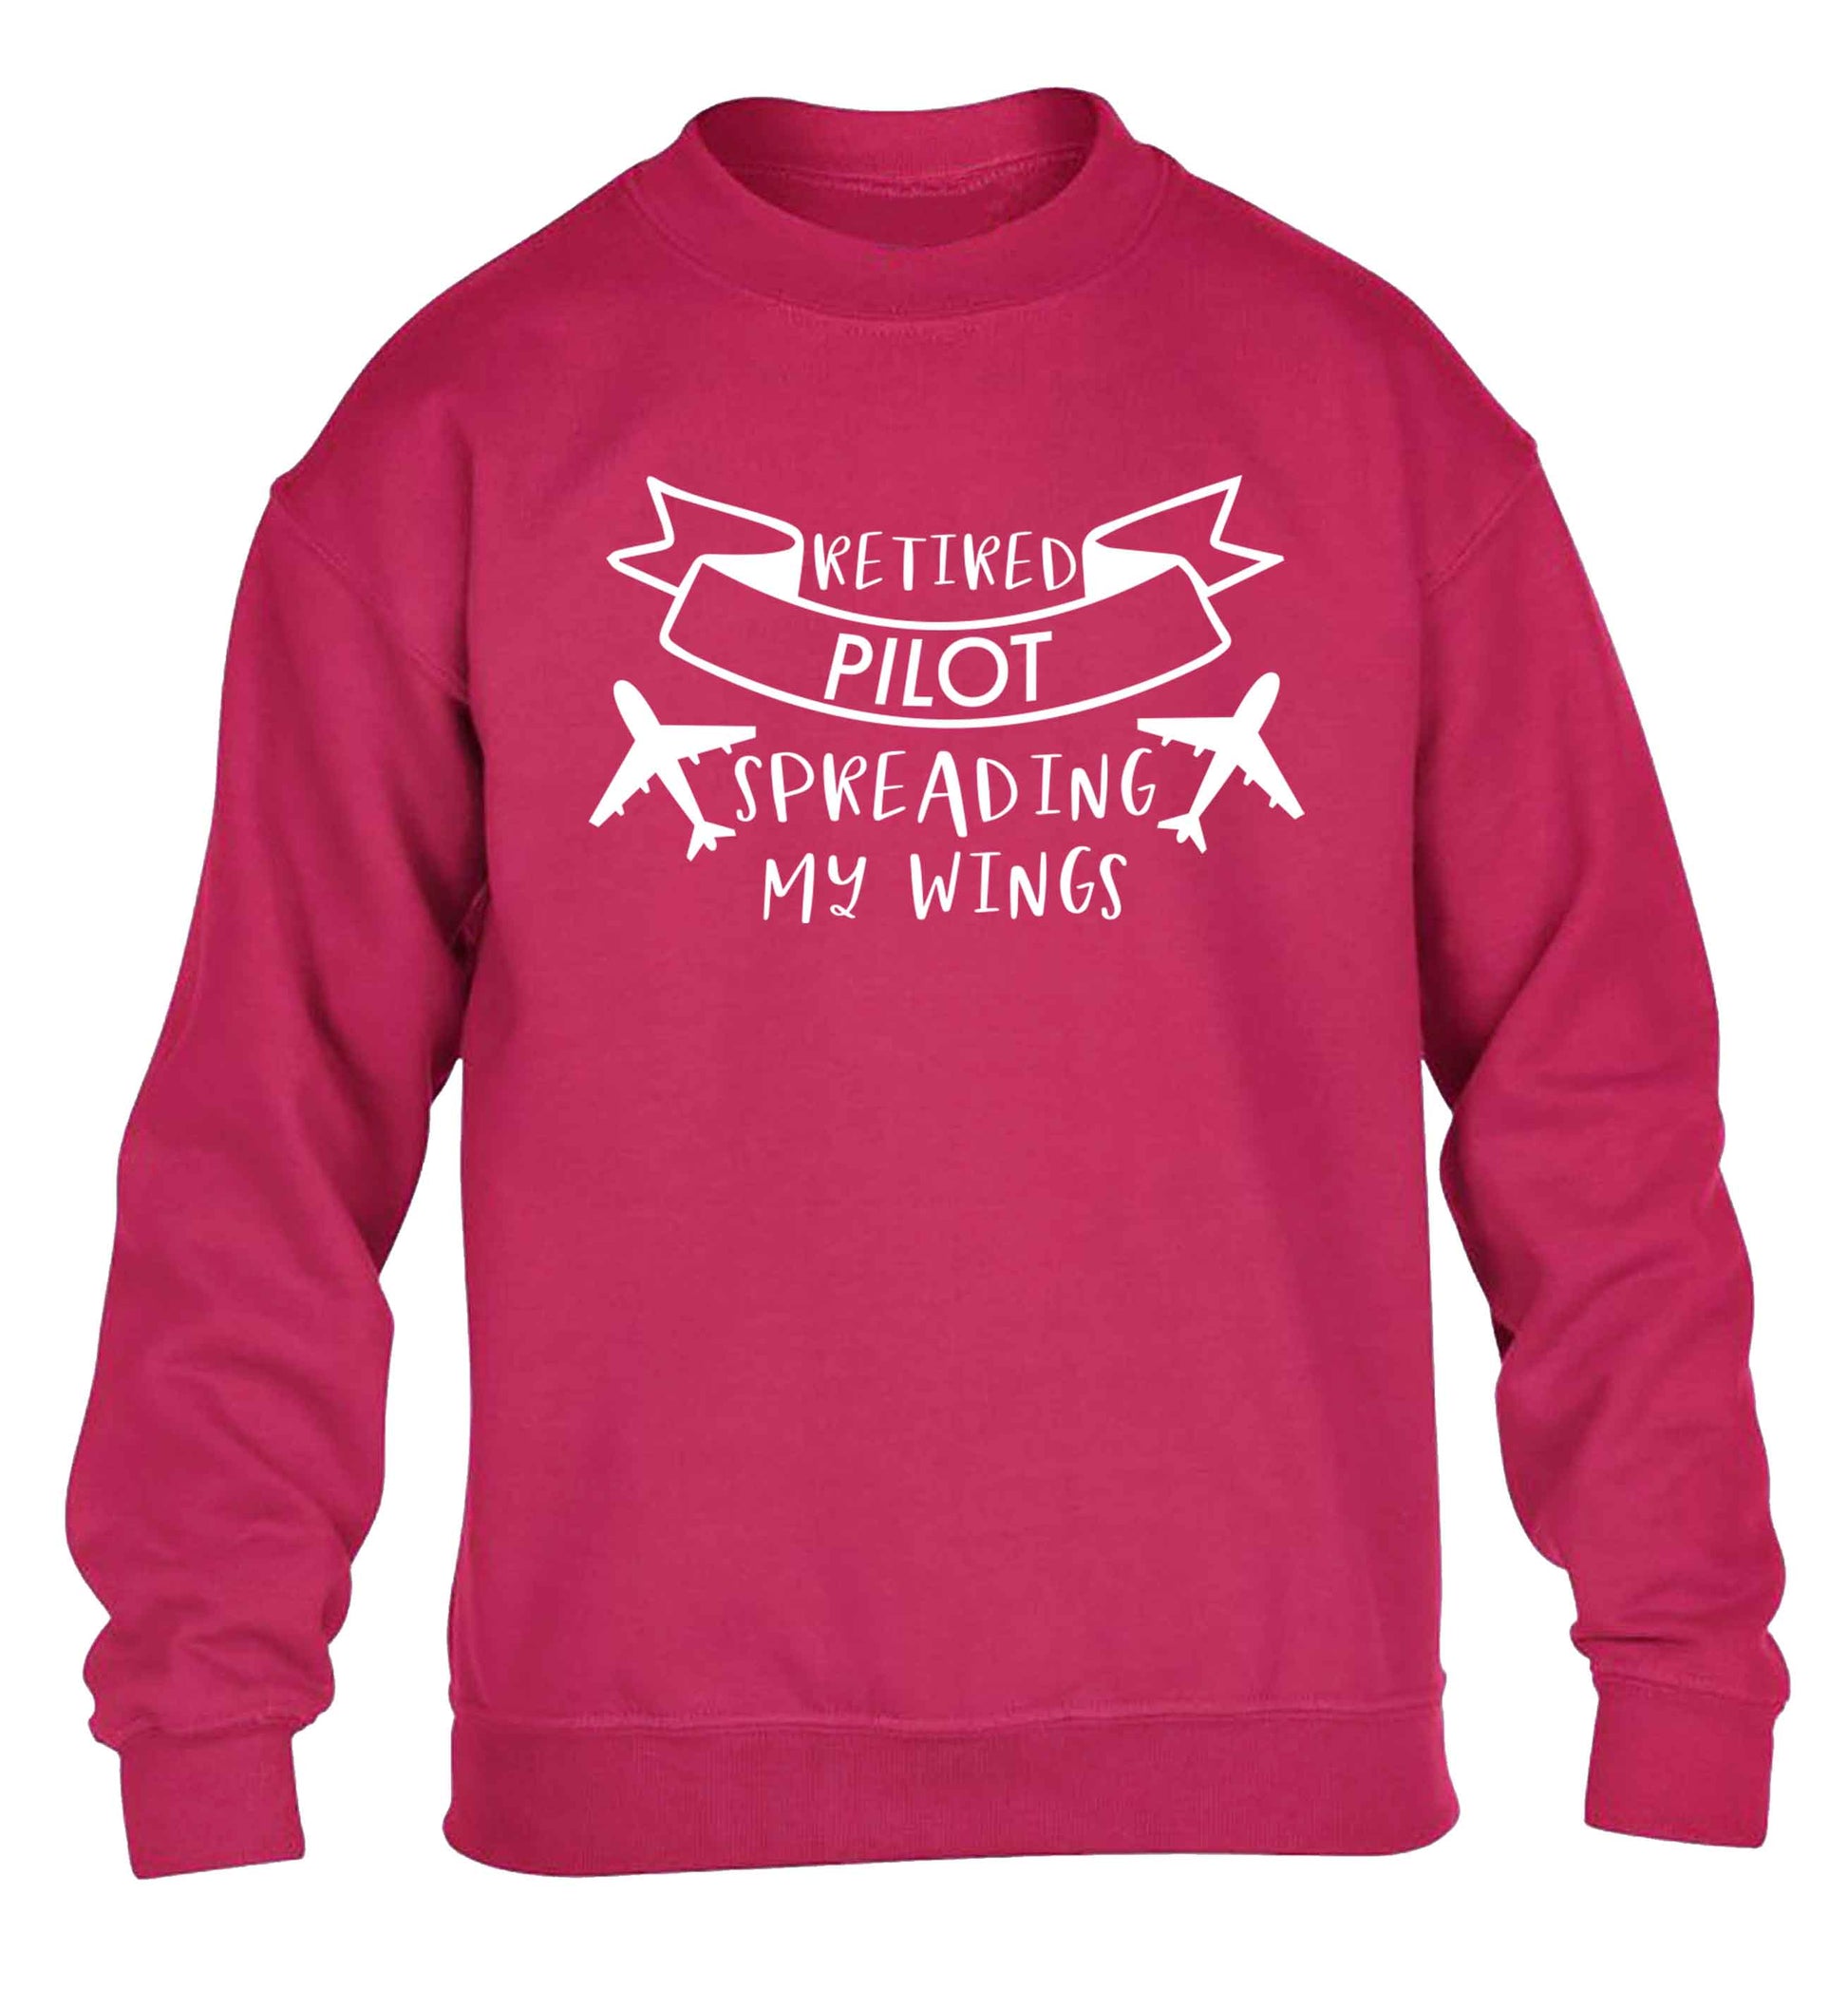 Retired pilot spreading my wings children's pink sweater 12-13 Years